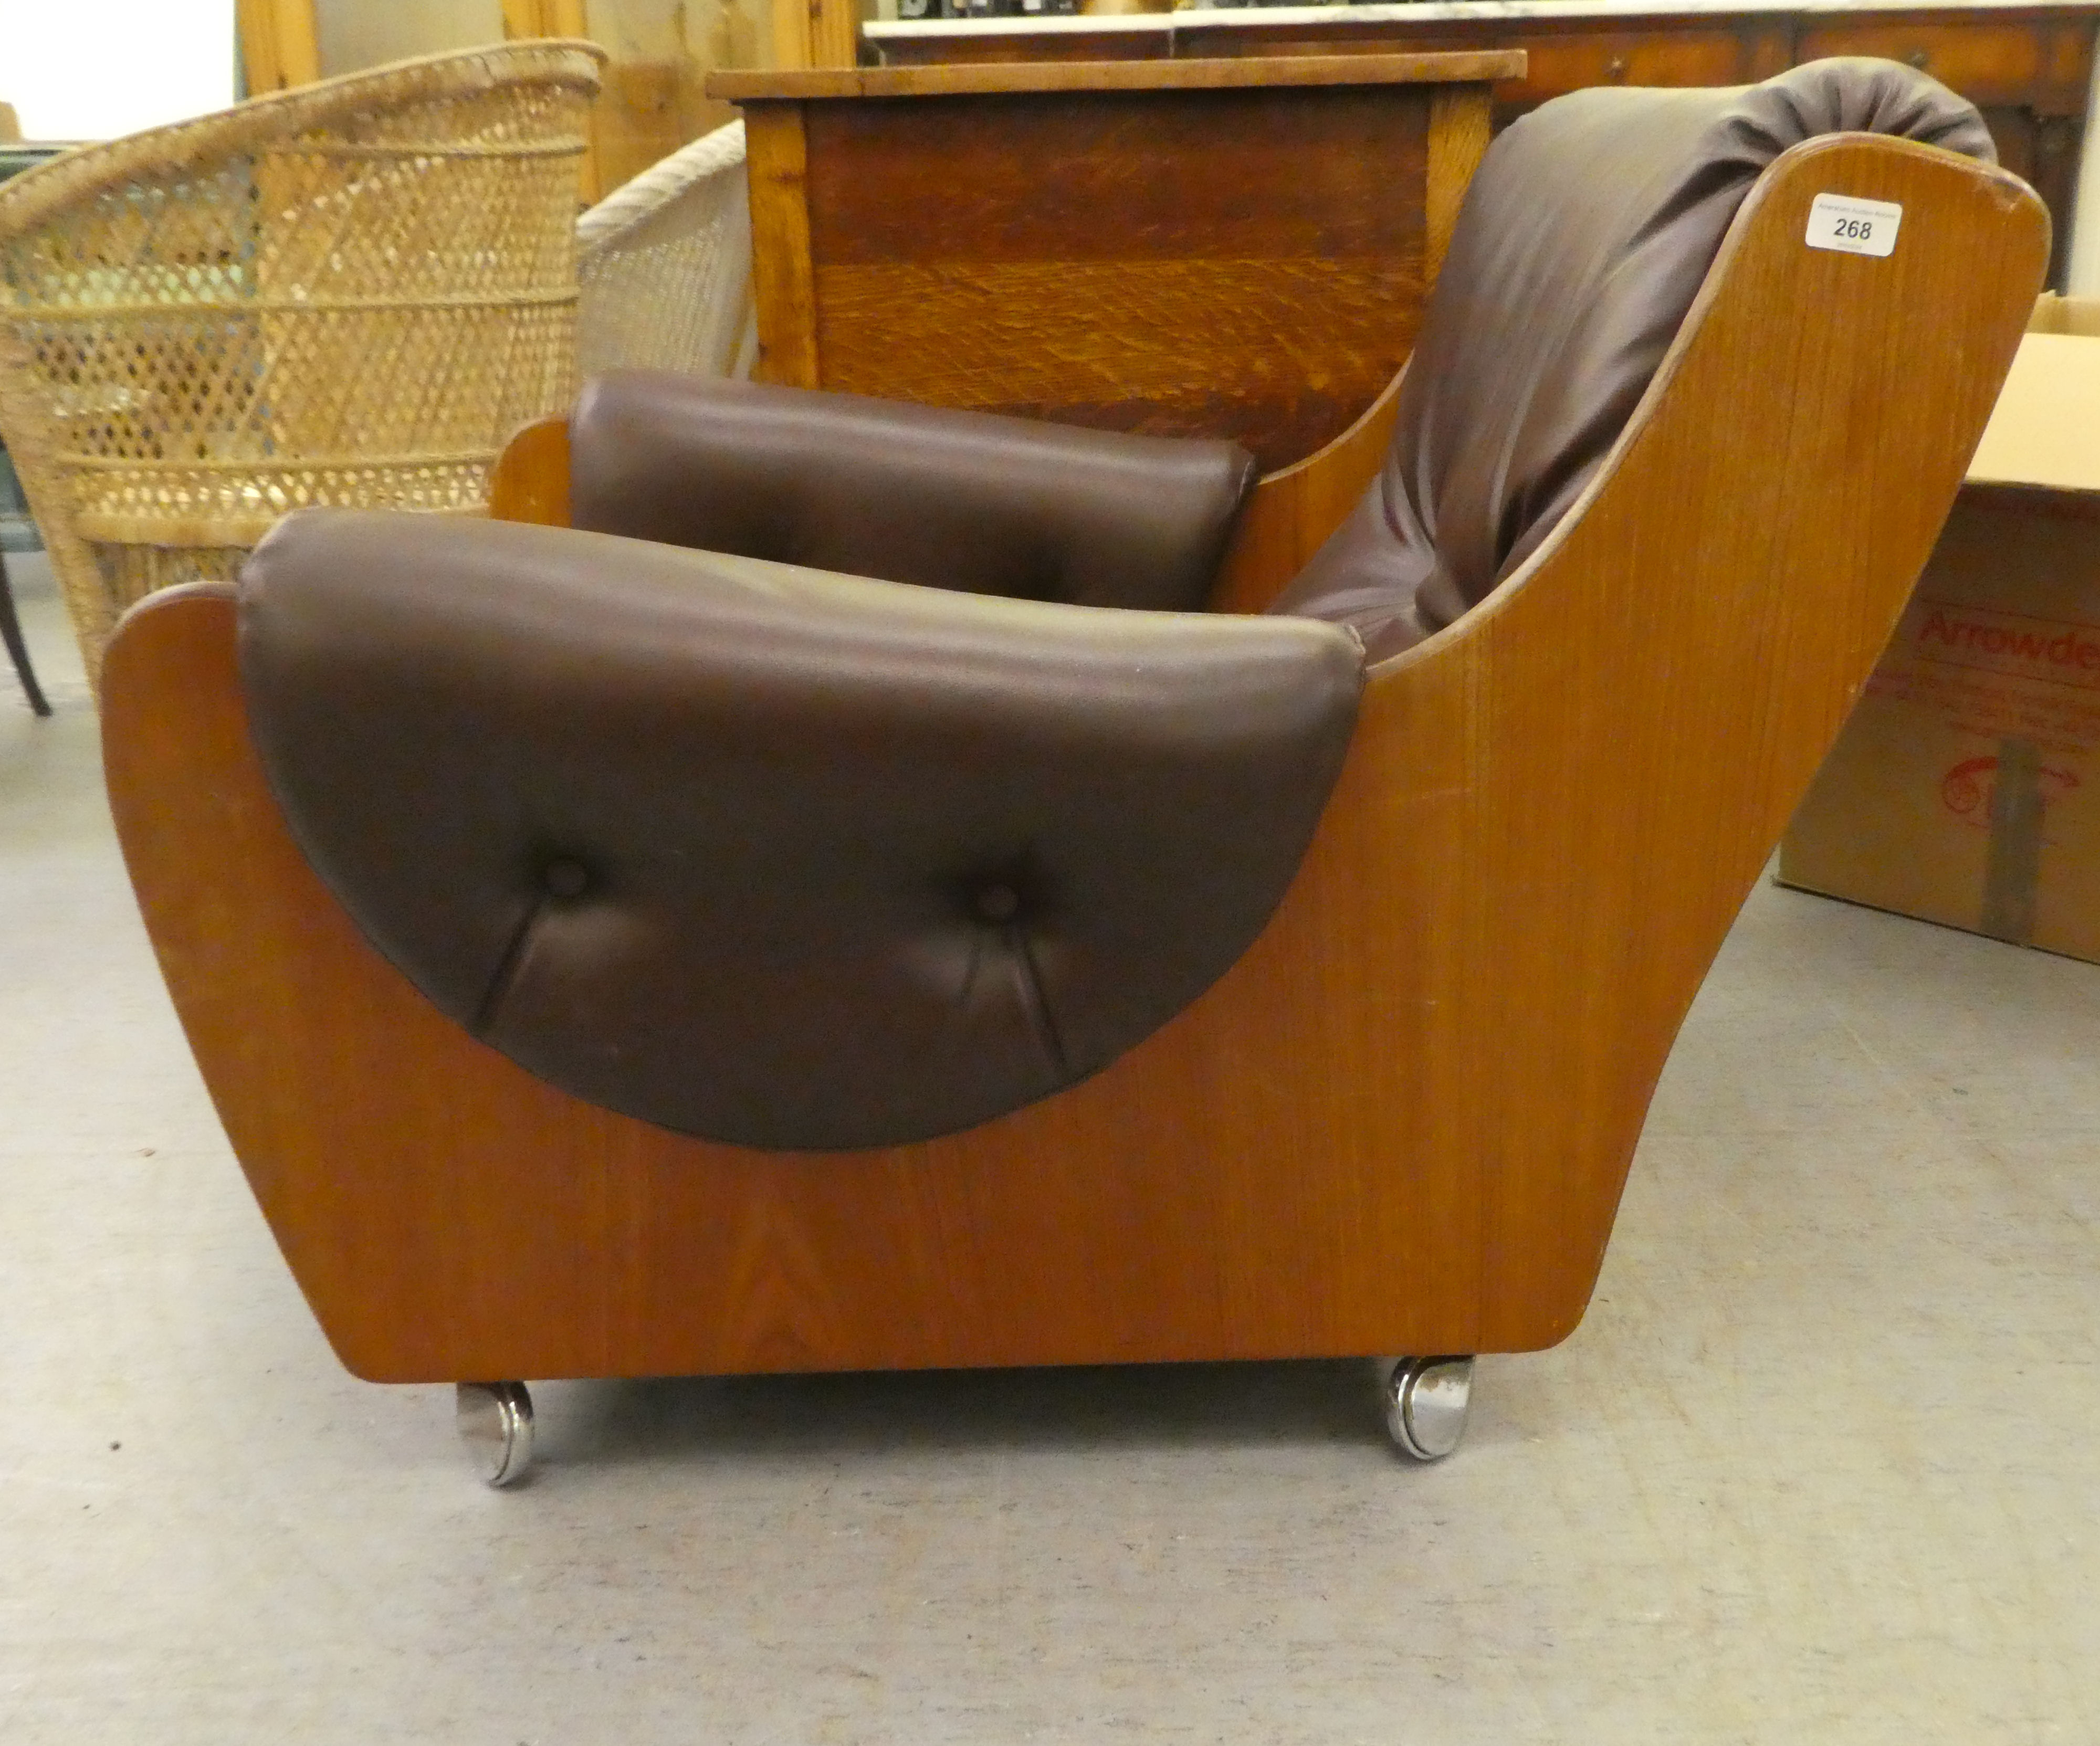 A 1960/70s G-Plan teak framed easy chair with a faux brown hide upholstered back and seat